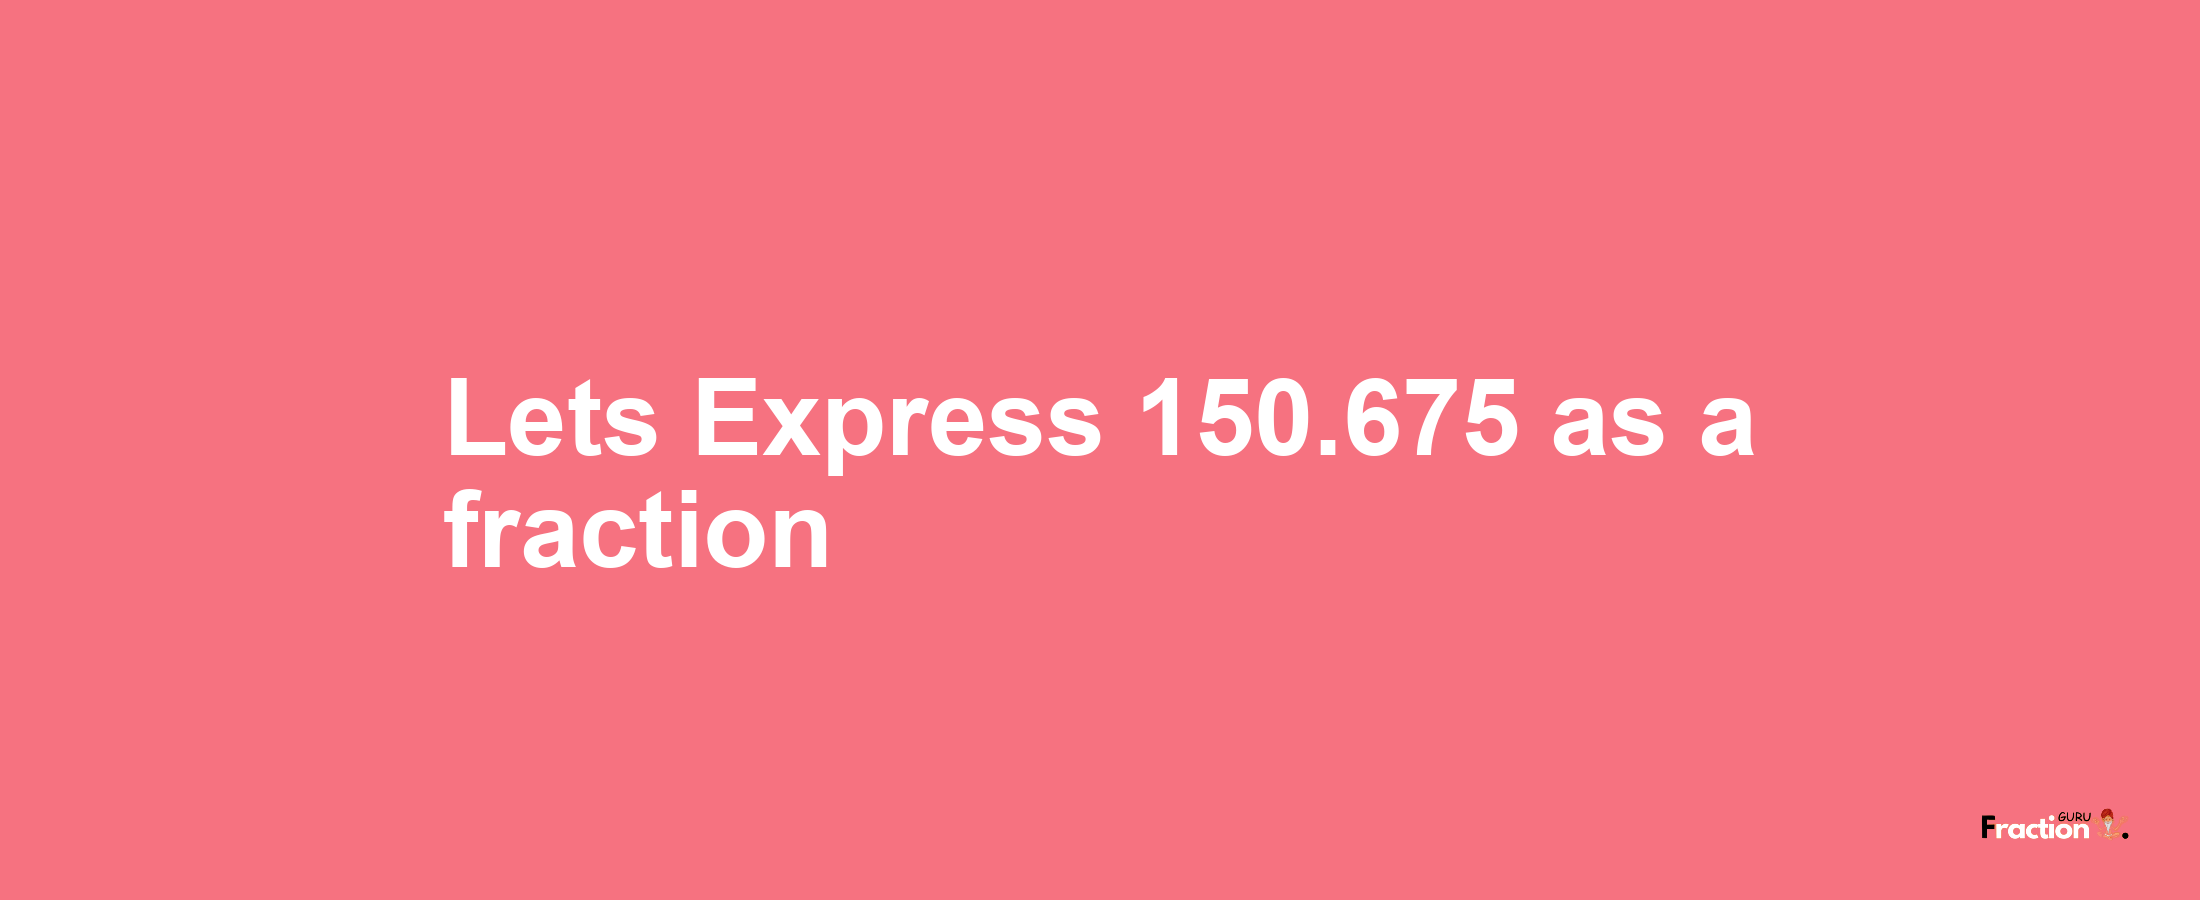 Lets Express 150.675 as afraction